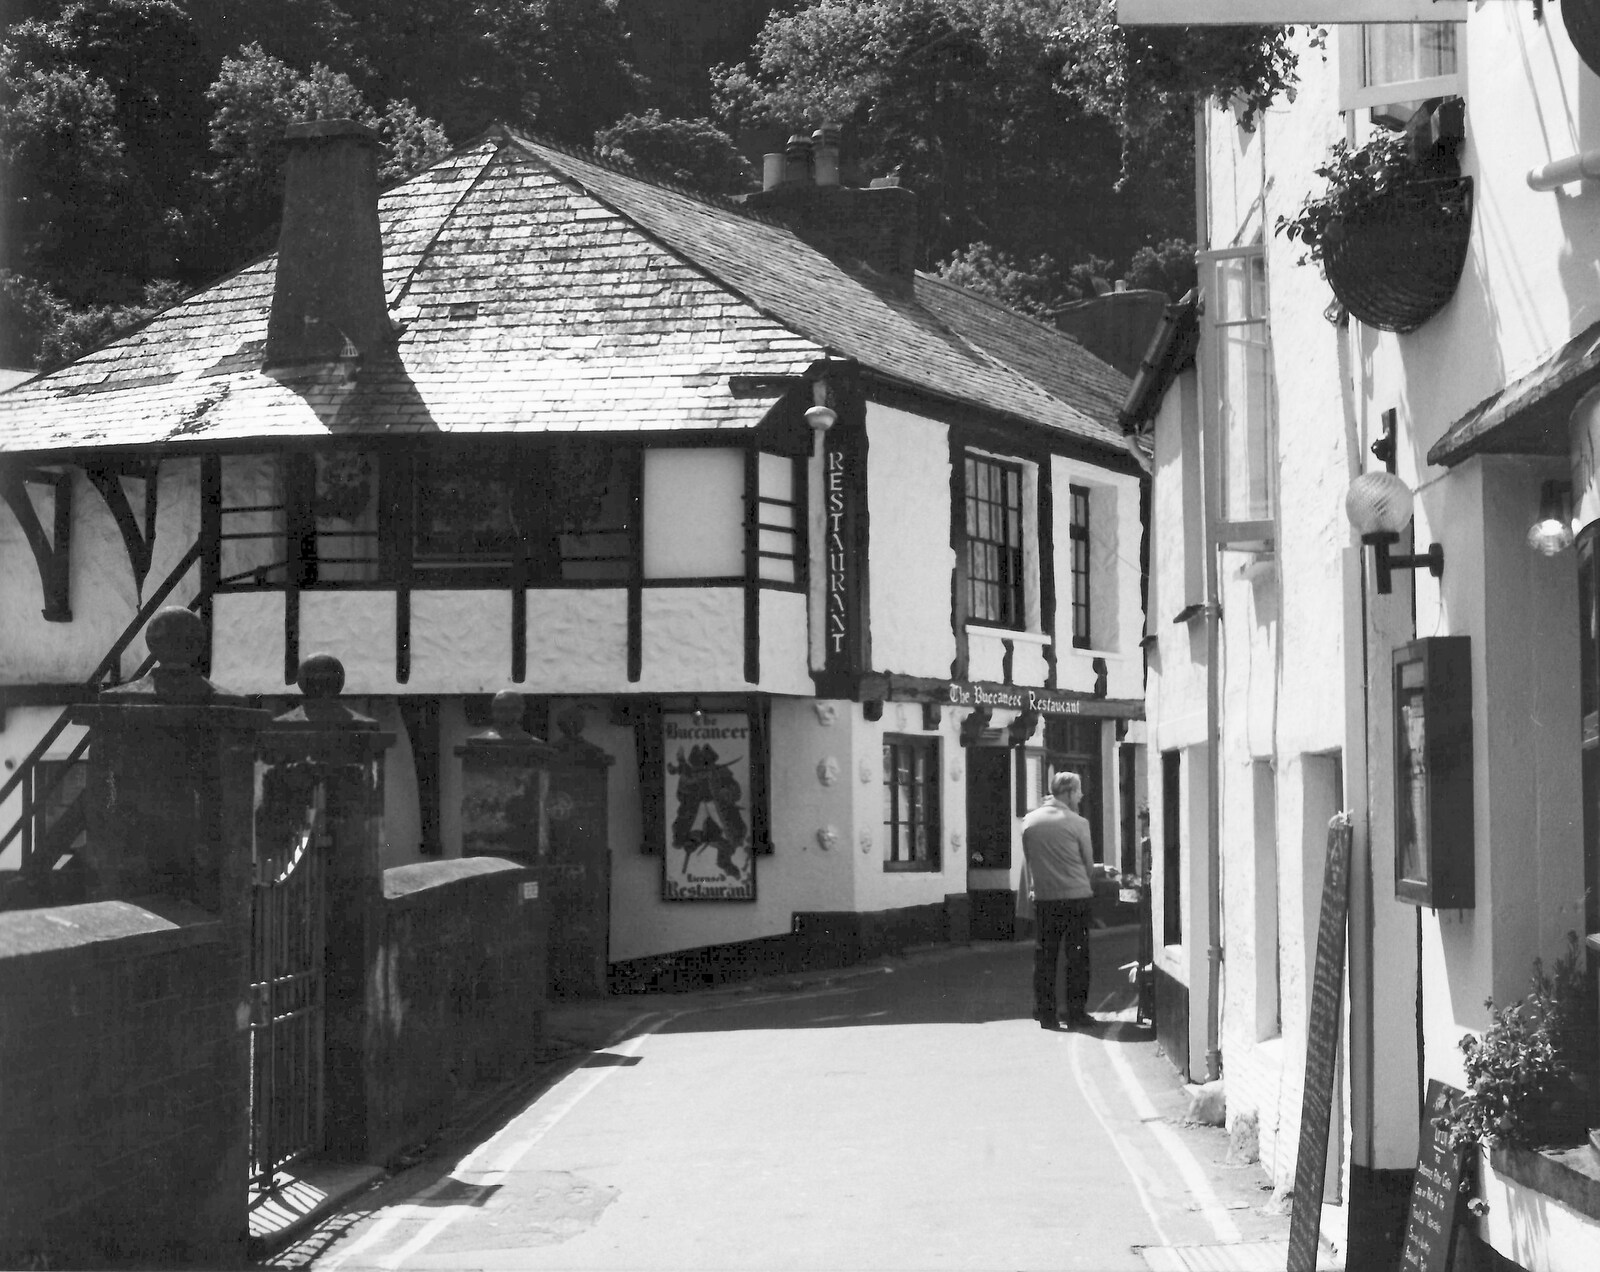 A half-timbered restaurant in Polperro from Uni: The Last Day of Term, Plymouth Polytechnic, Devon - 2nd June 1987